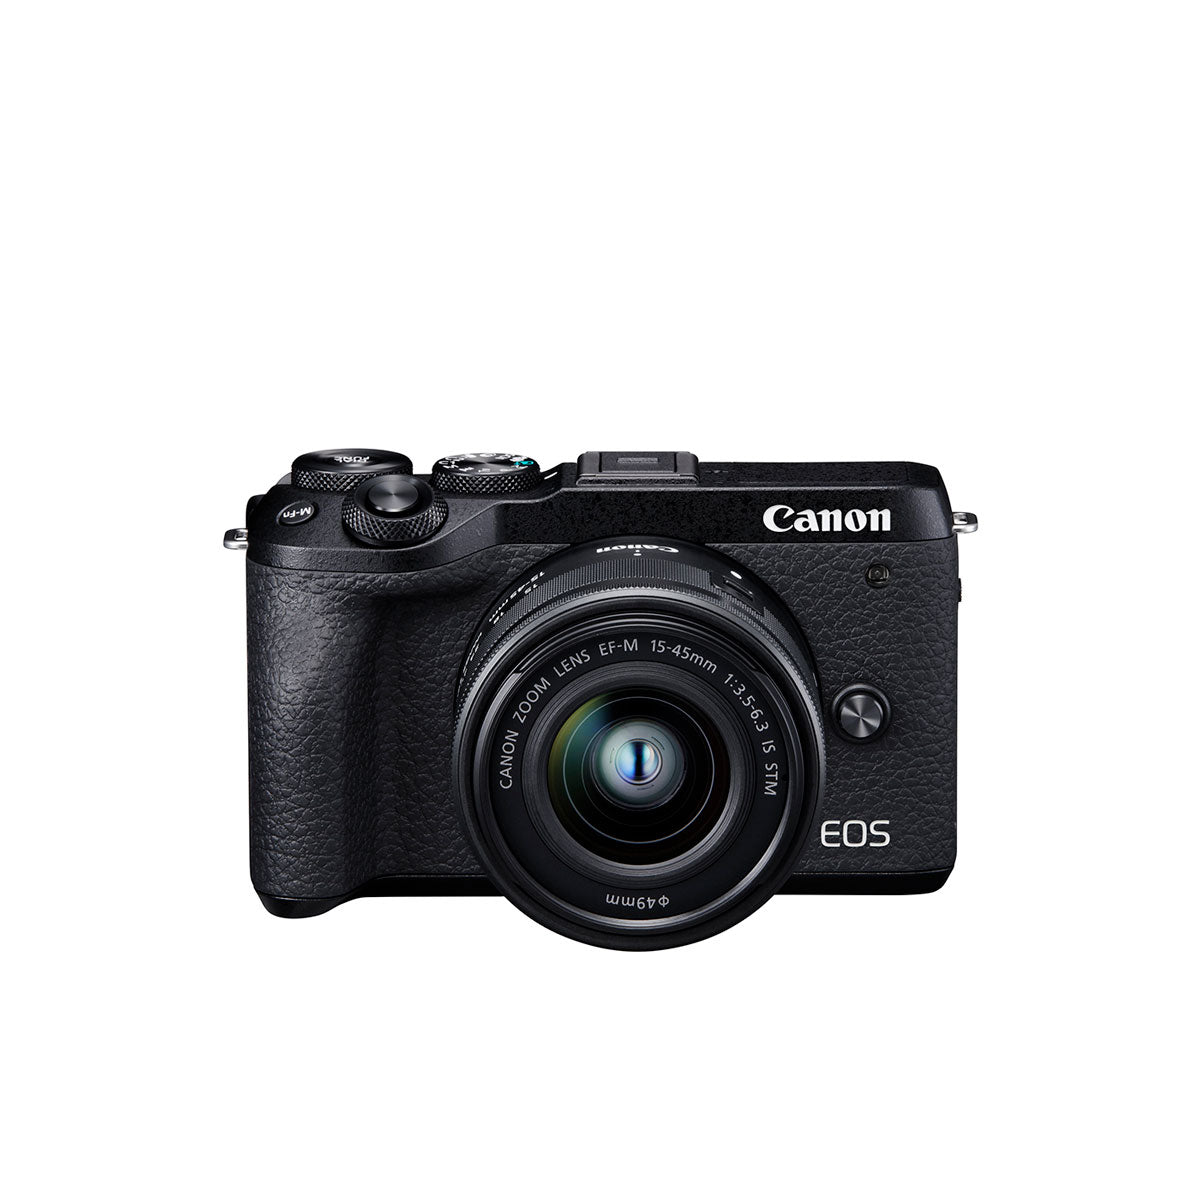 Canon EOS M6 Mark II Mirrorless Camera with EF-M 15-45mm IS STM Lens and EVF (Black)